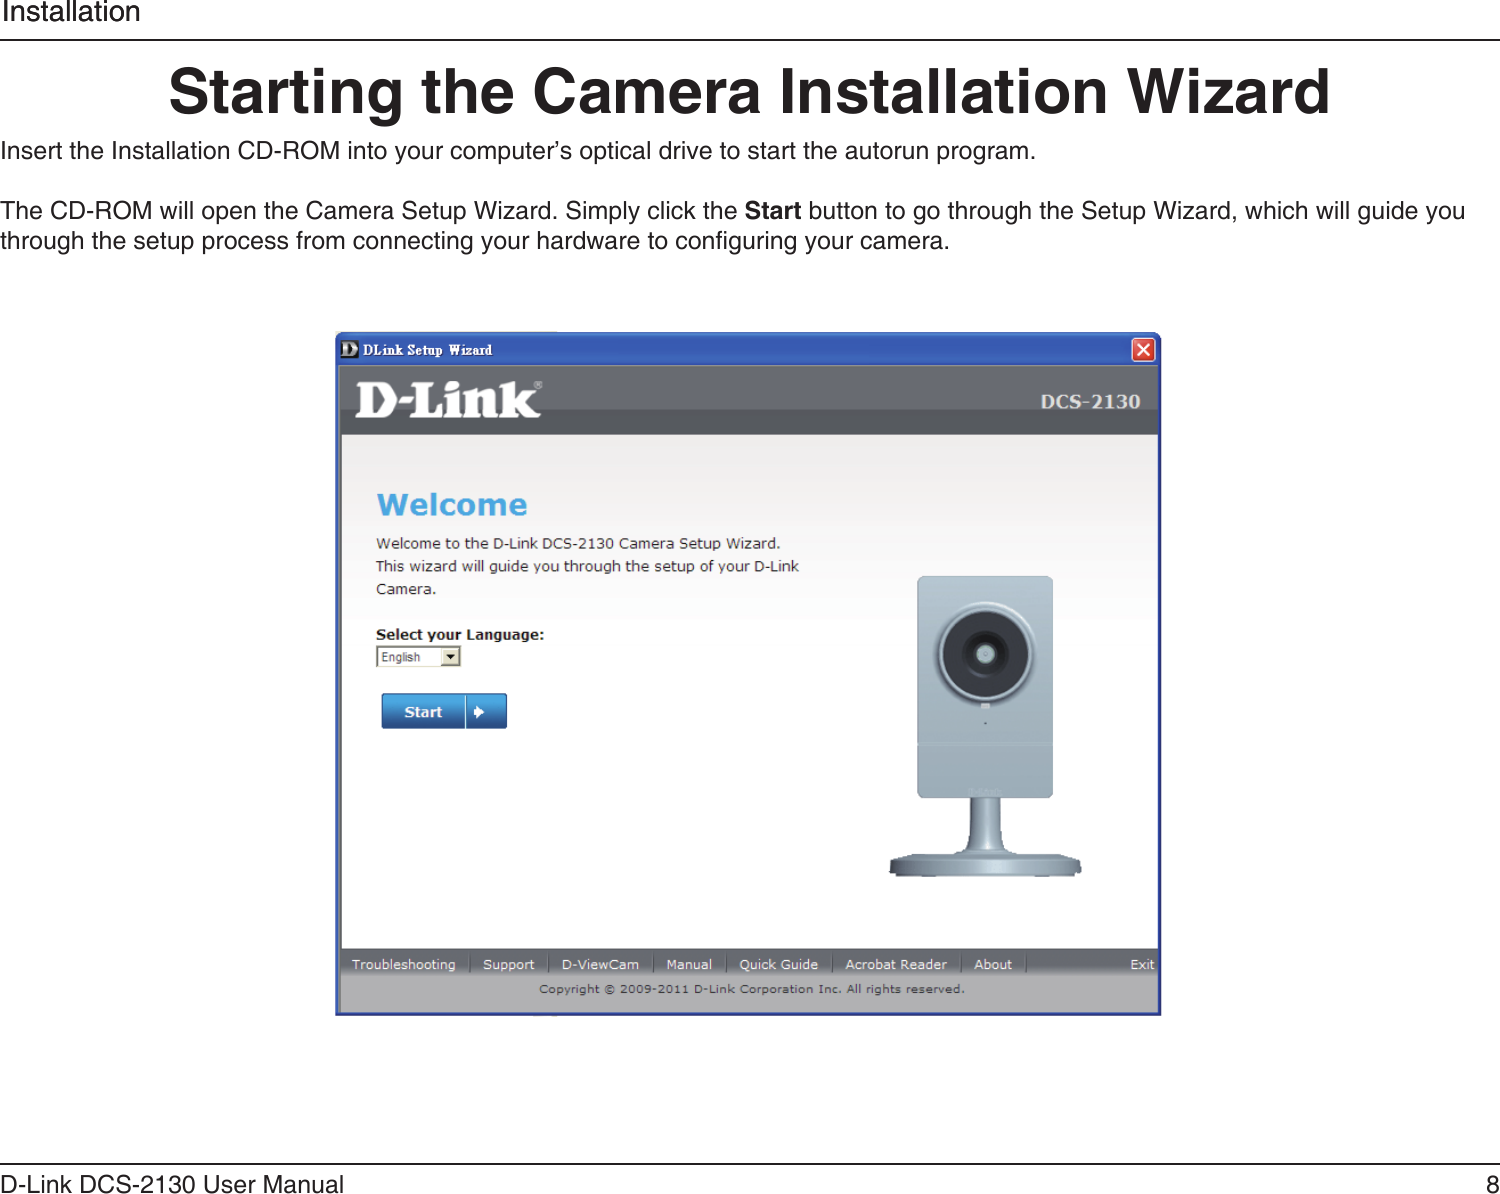 8D-Link DCS-2130 User ManualInstallationStarting the Camera Installation WizardInsert the Installation CD-ROM into your computer’s optical drive to start the autorun program. The CD-ROM will open the Camera Setup Wizard. Simply click the Start button to go through the Setup Wizard, which will guide you through the setup process from connecting your hardware to conguring your camera.Installation